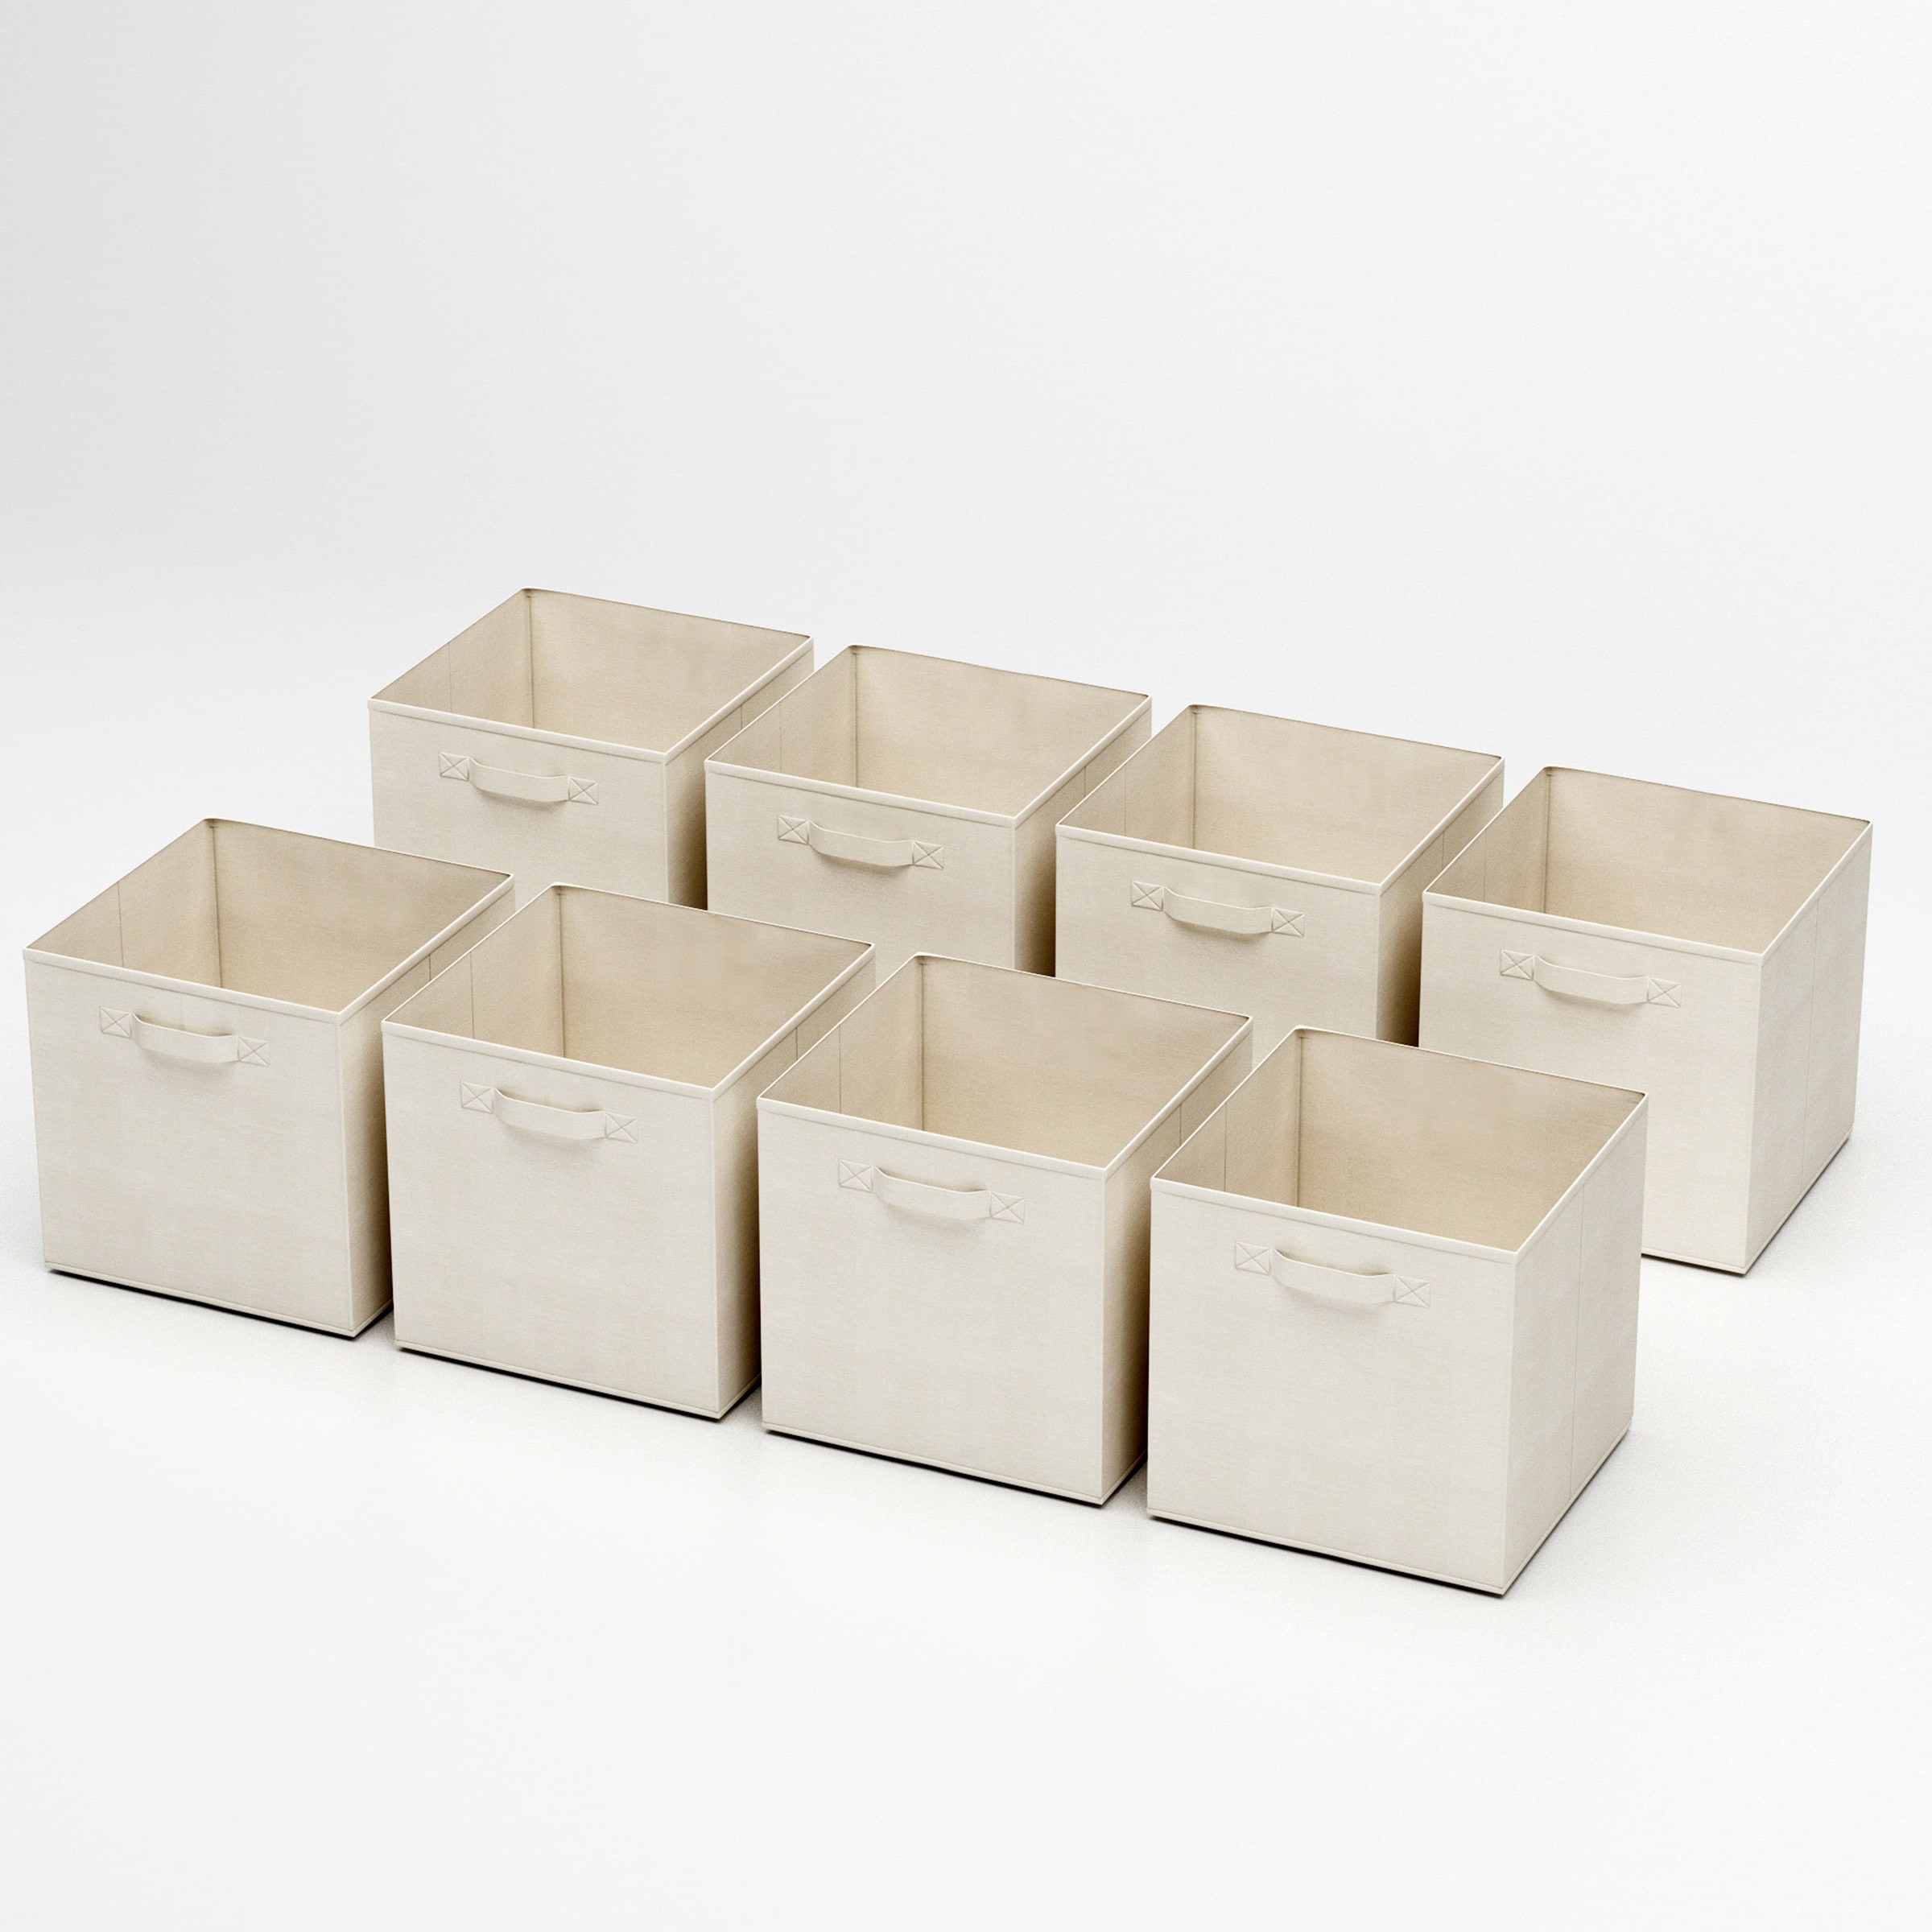 Buy Homesmart Set of 2 Beige Folding Storage Boxes with Lids